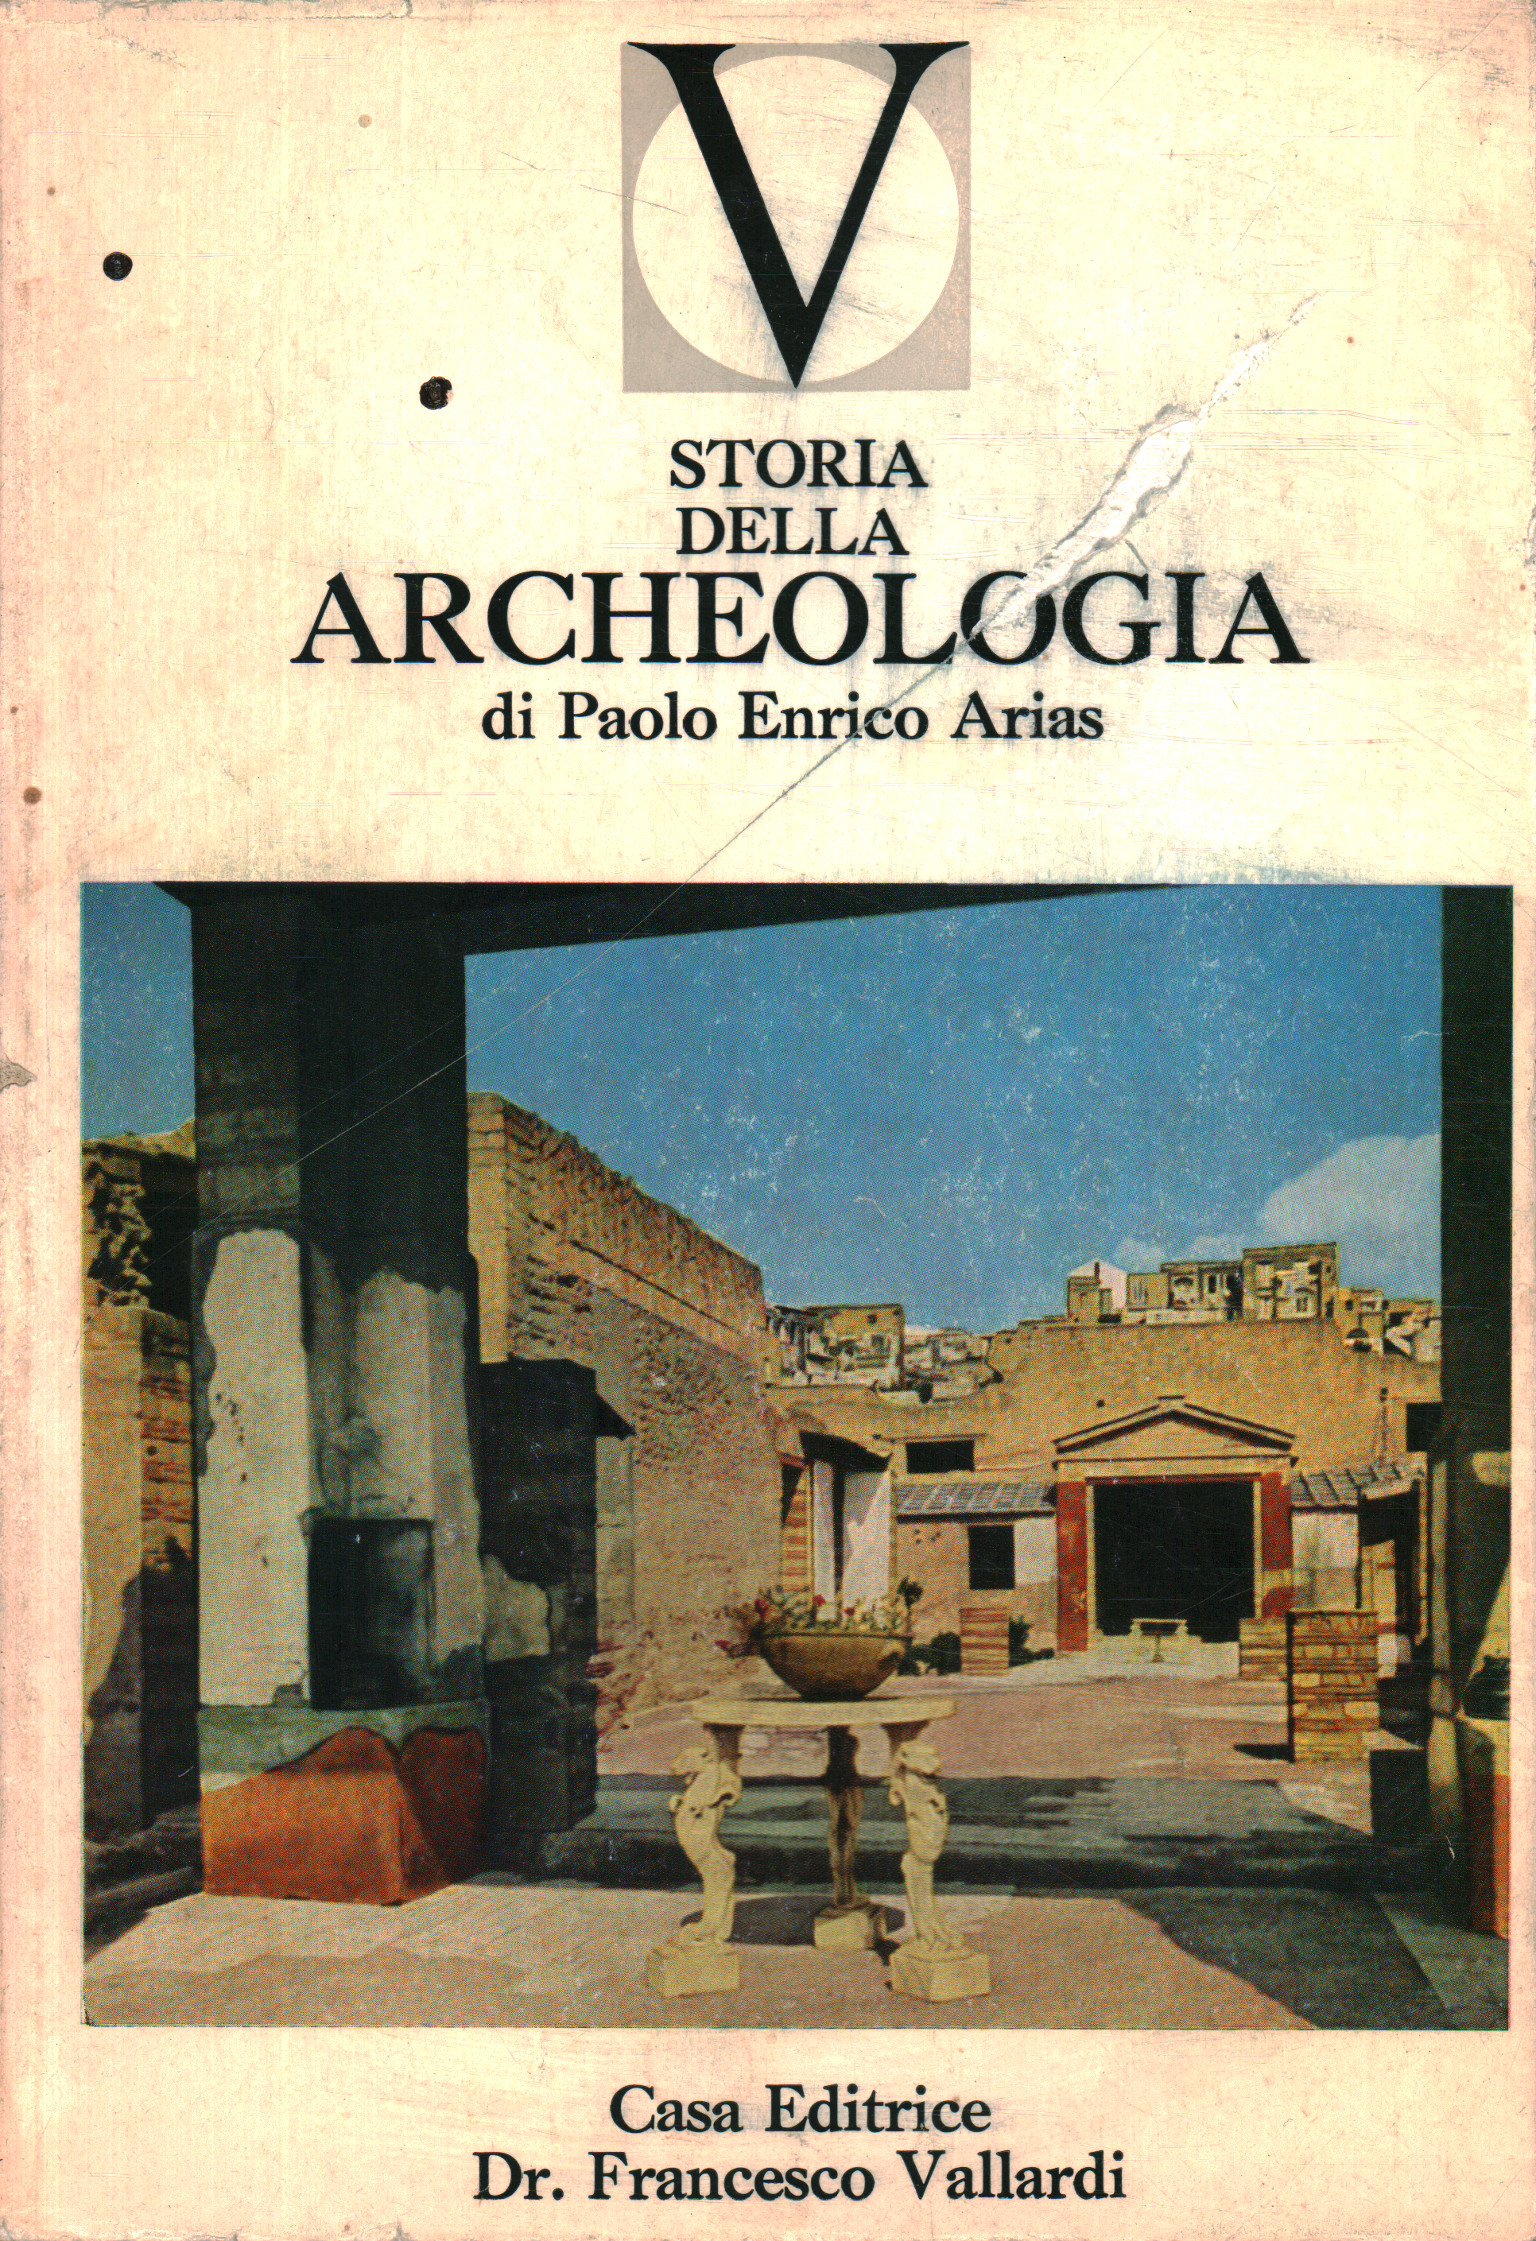 History of archaeology